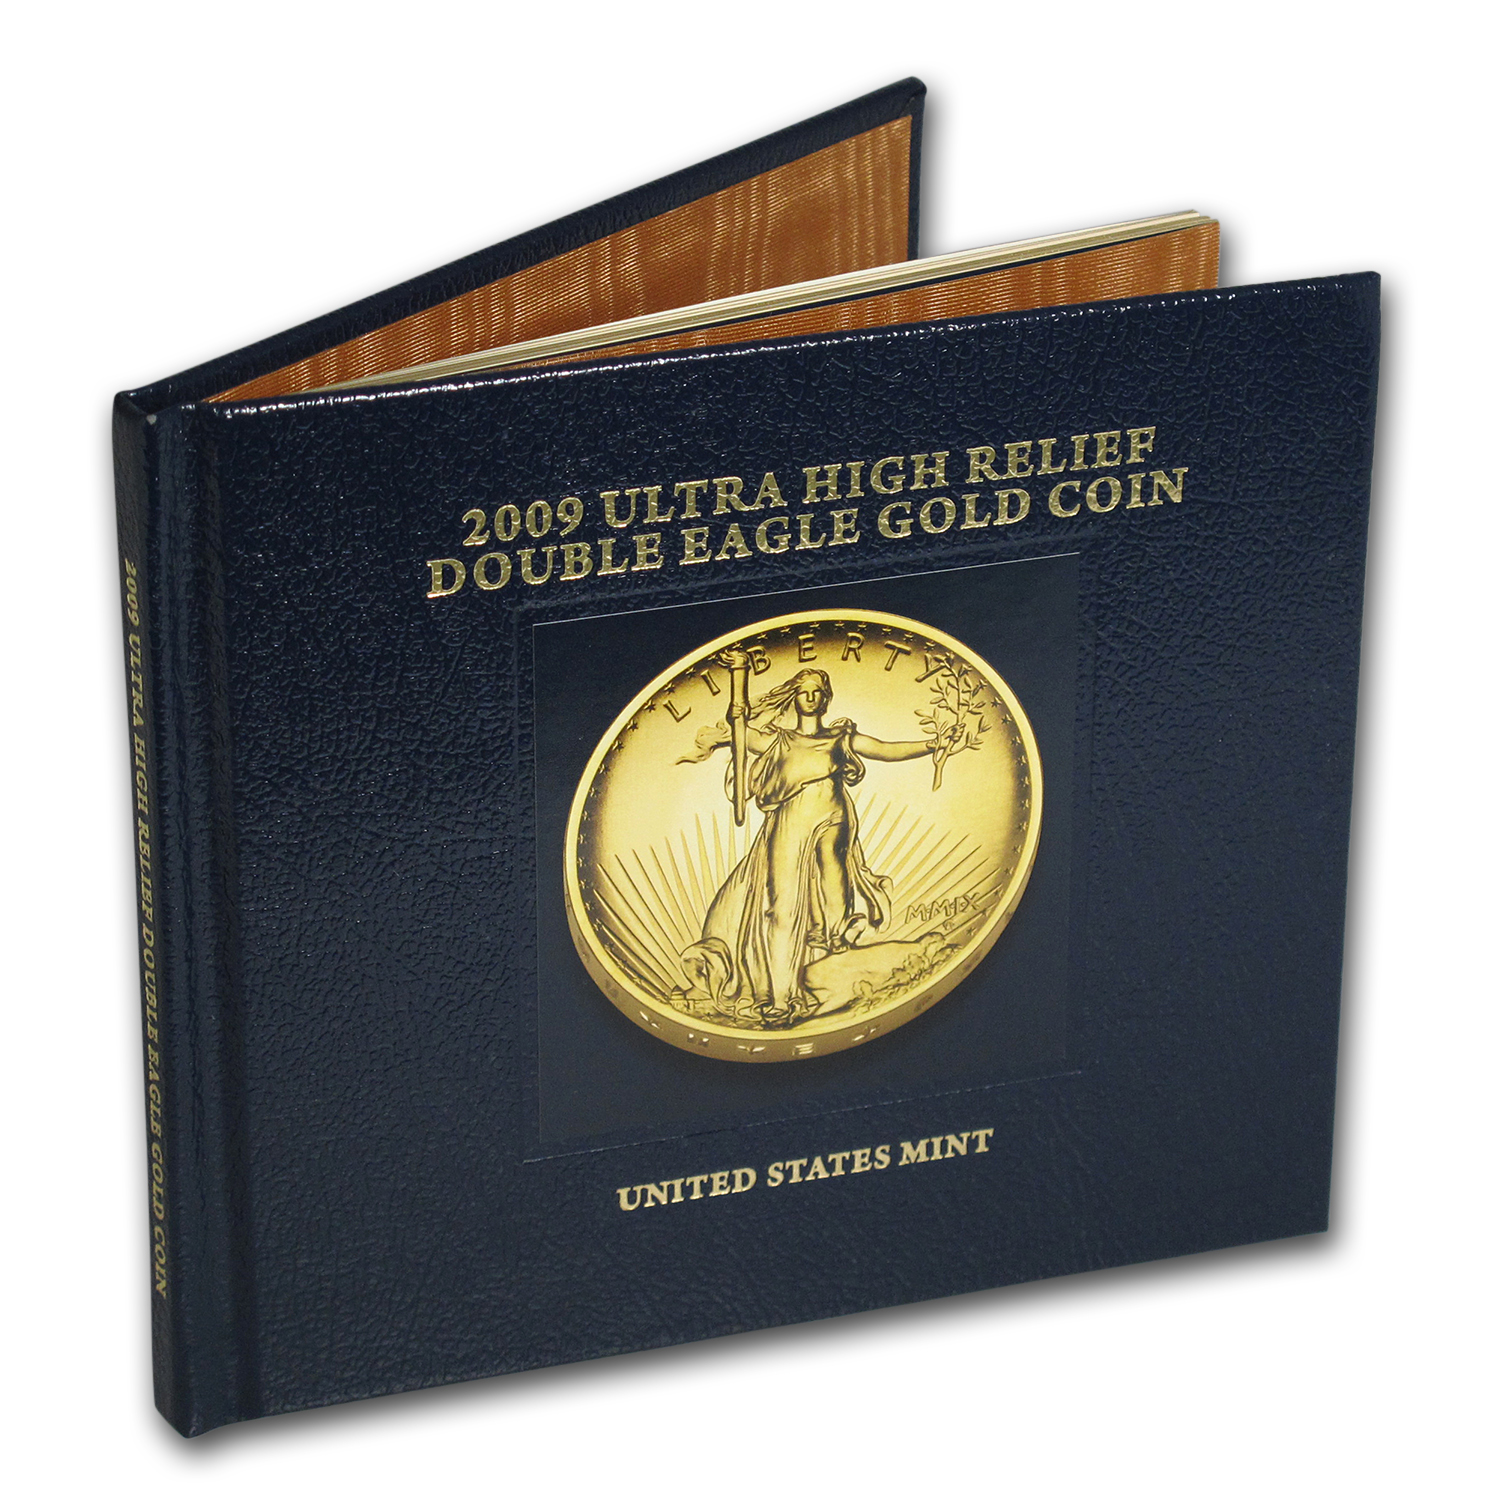 Buy OGP- 2009 Ultra High Relief Double Eagle Gold Coin Book - Click Image to Close